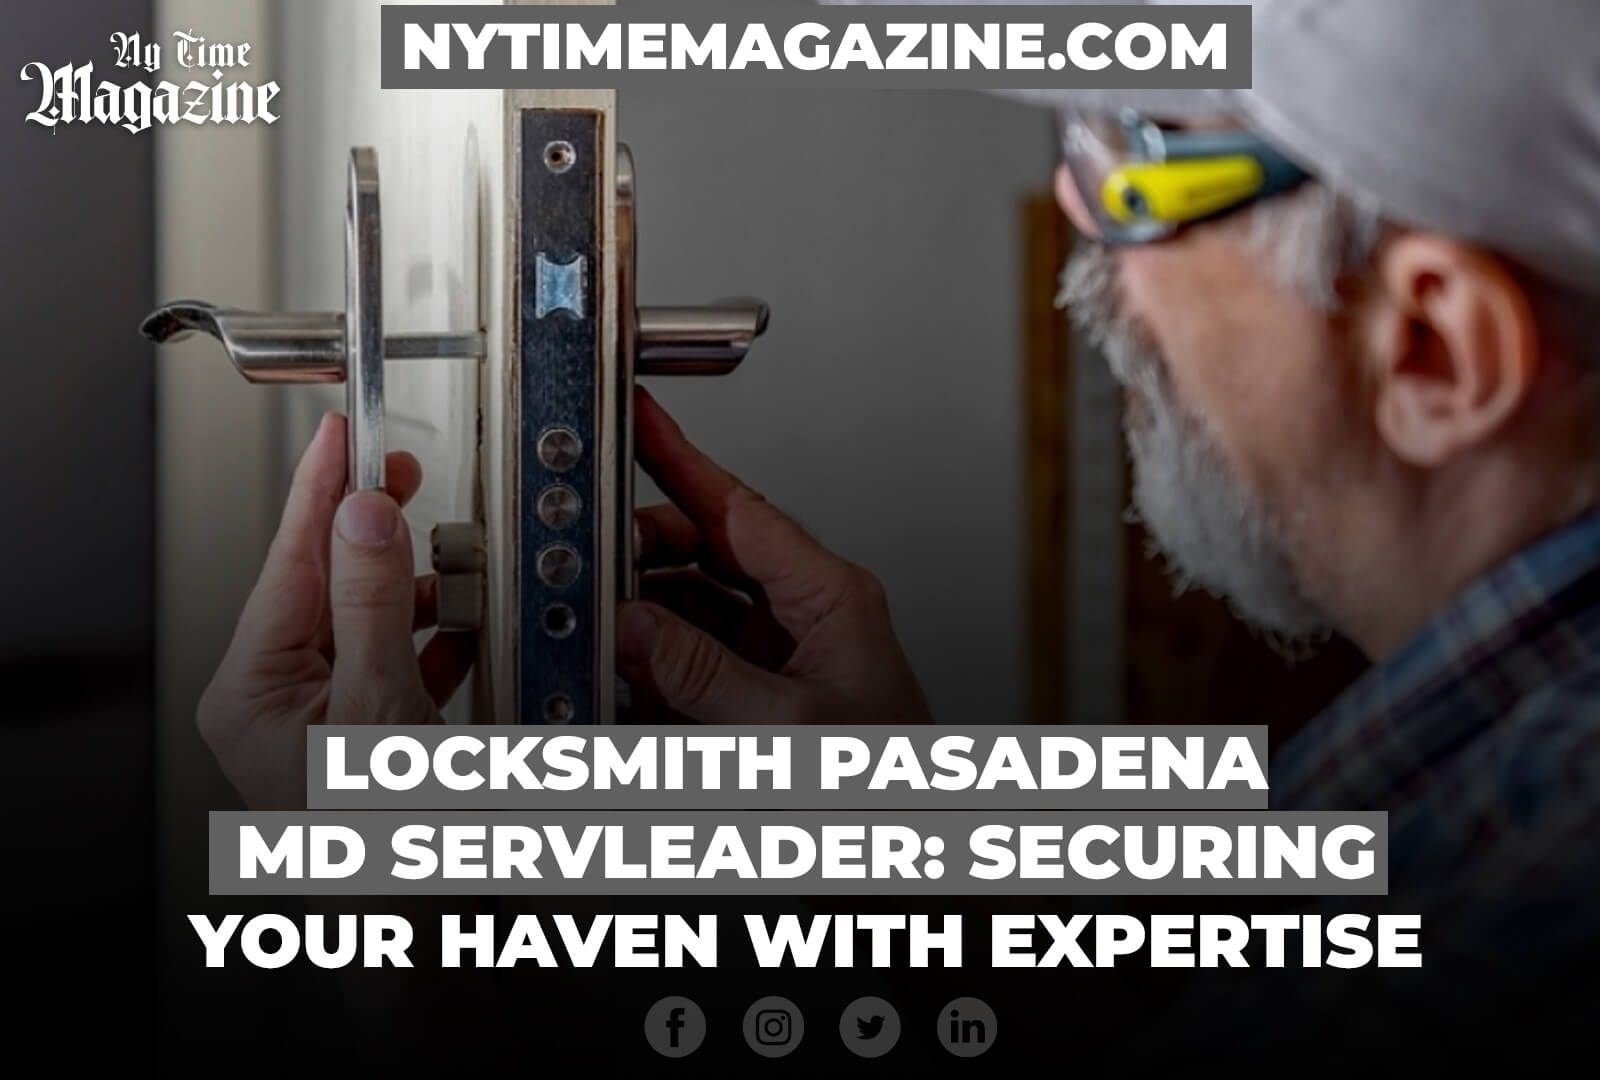 LOCKSMITH PASADENA MD SERVLEADER: SECURING YOUR HAVEN WITH EXPERTISE